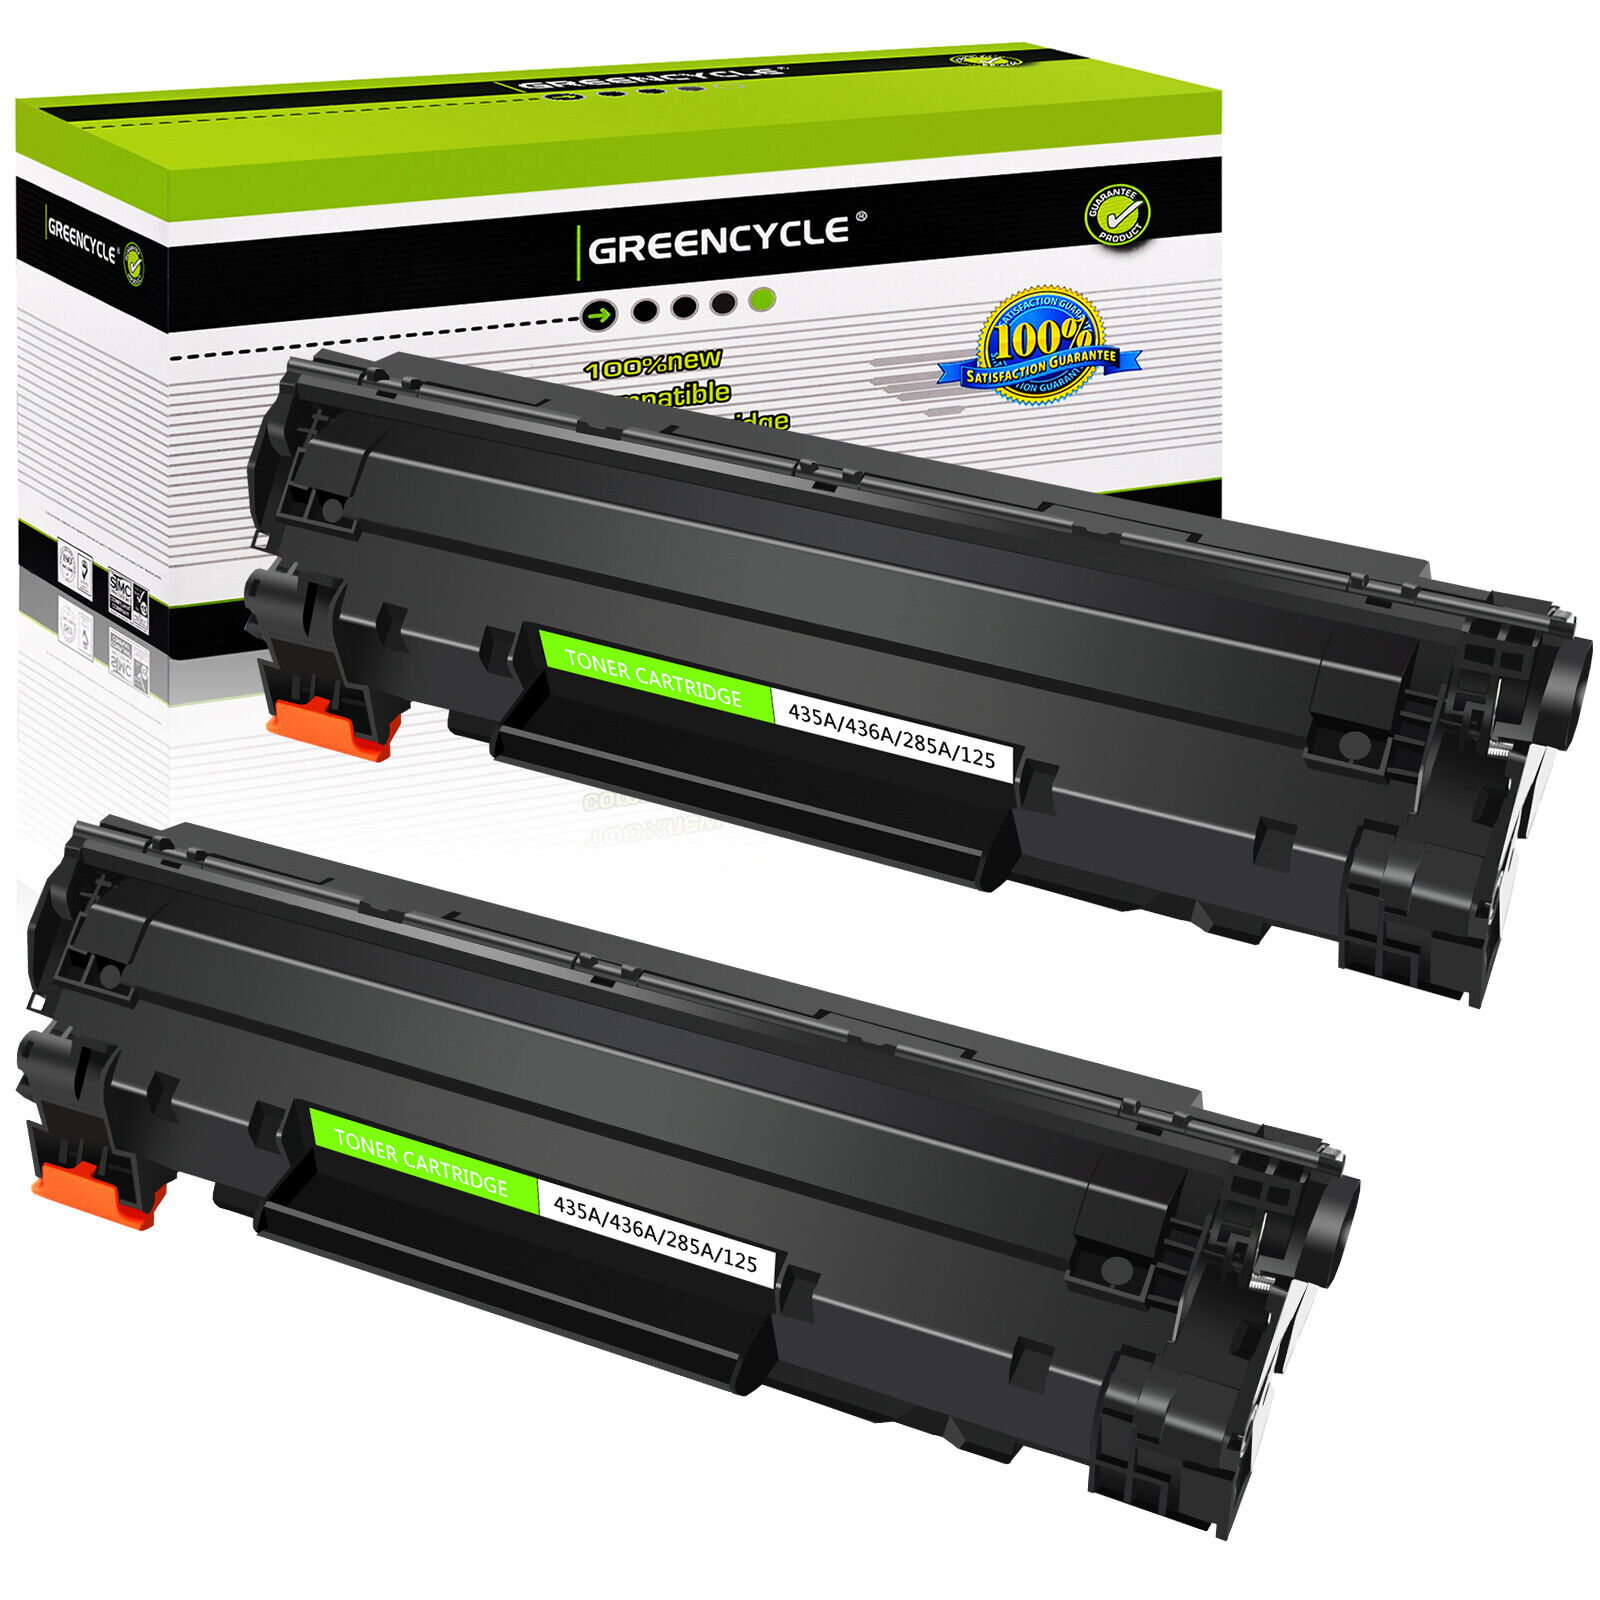 GREENCYCLE 2 Pack CE285A 85A Toner Cartridge For HP LaserJet P1100 P1102 P1102W